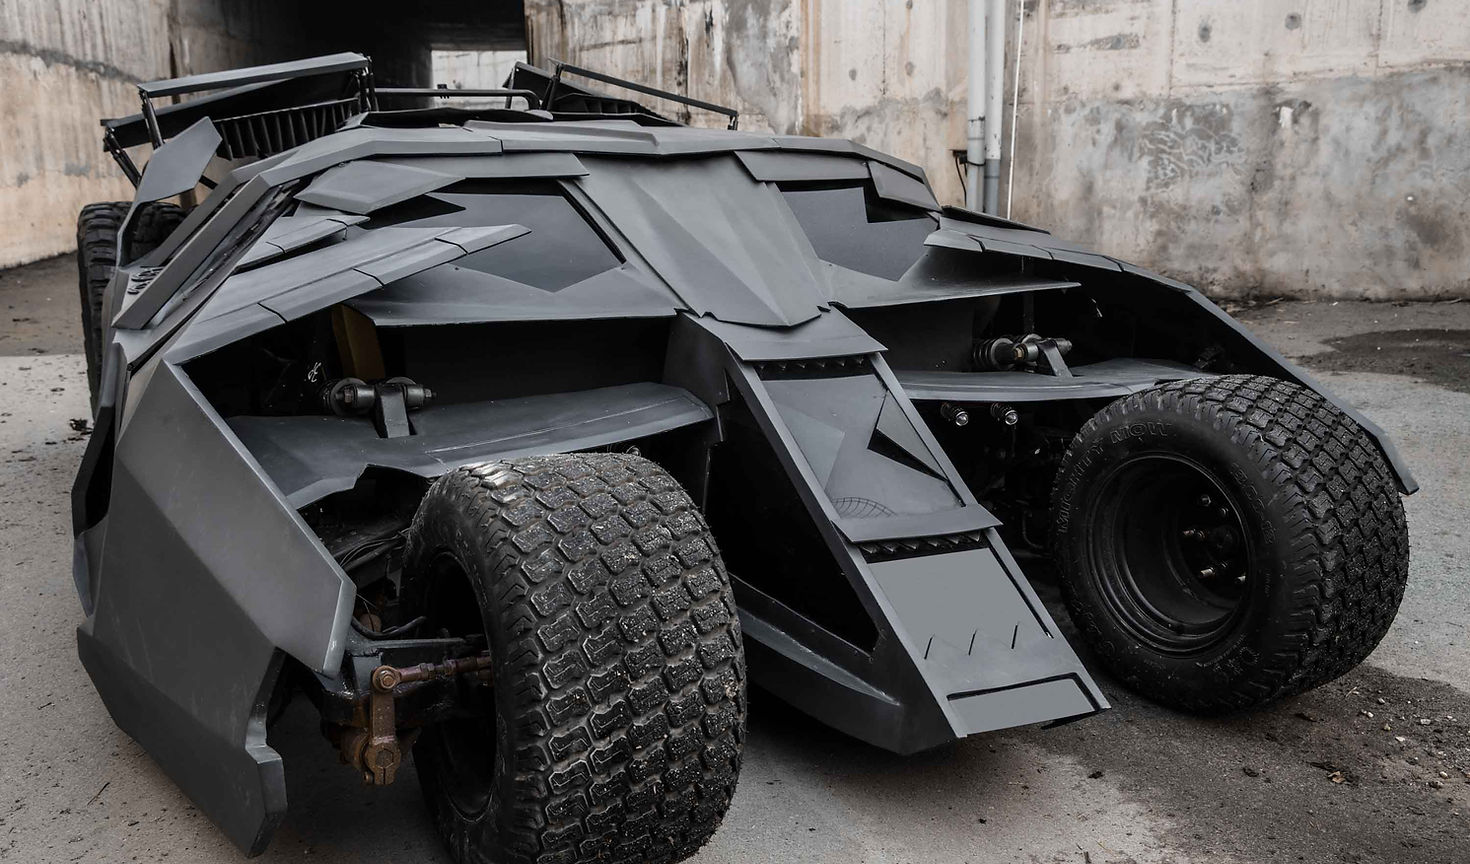 7 Real Cars That Happen to Look like the Batmobile